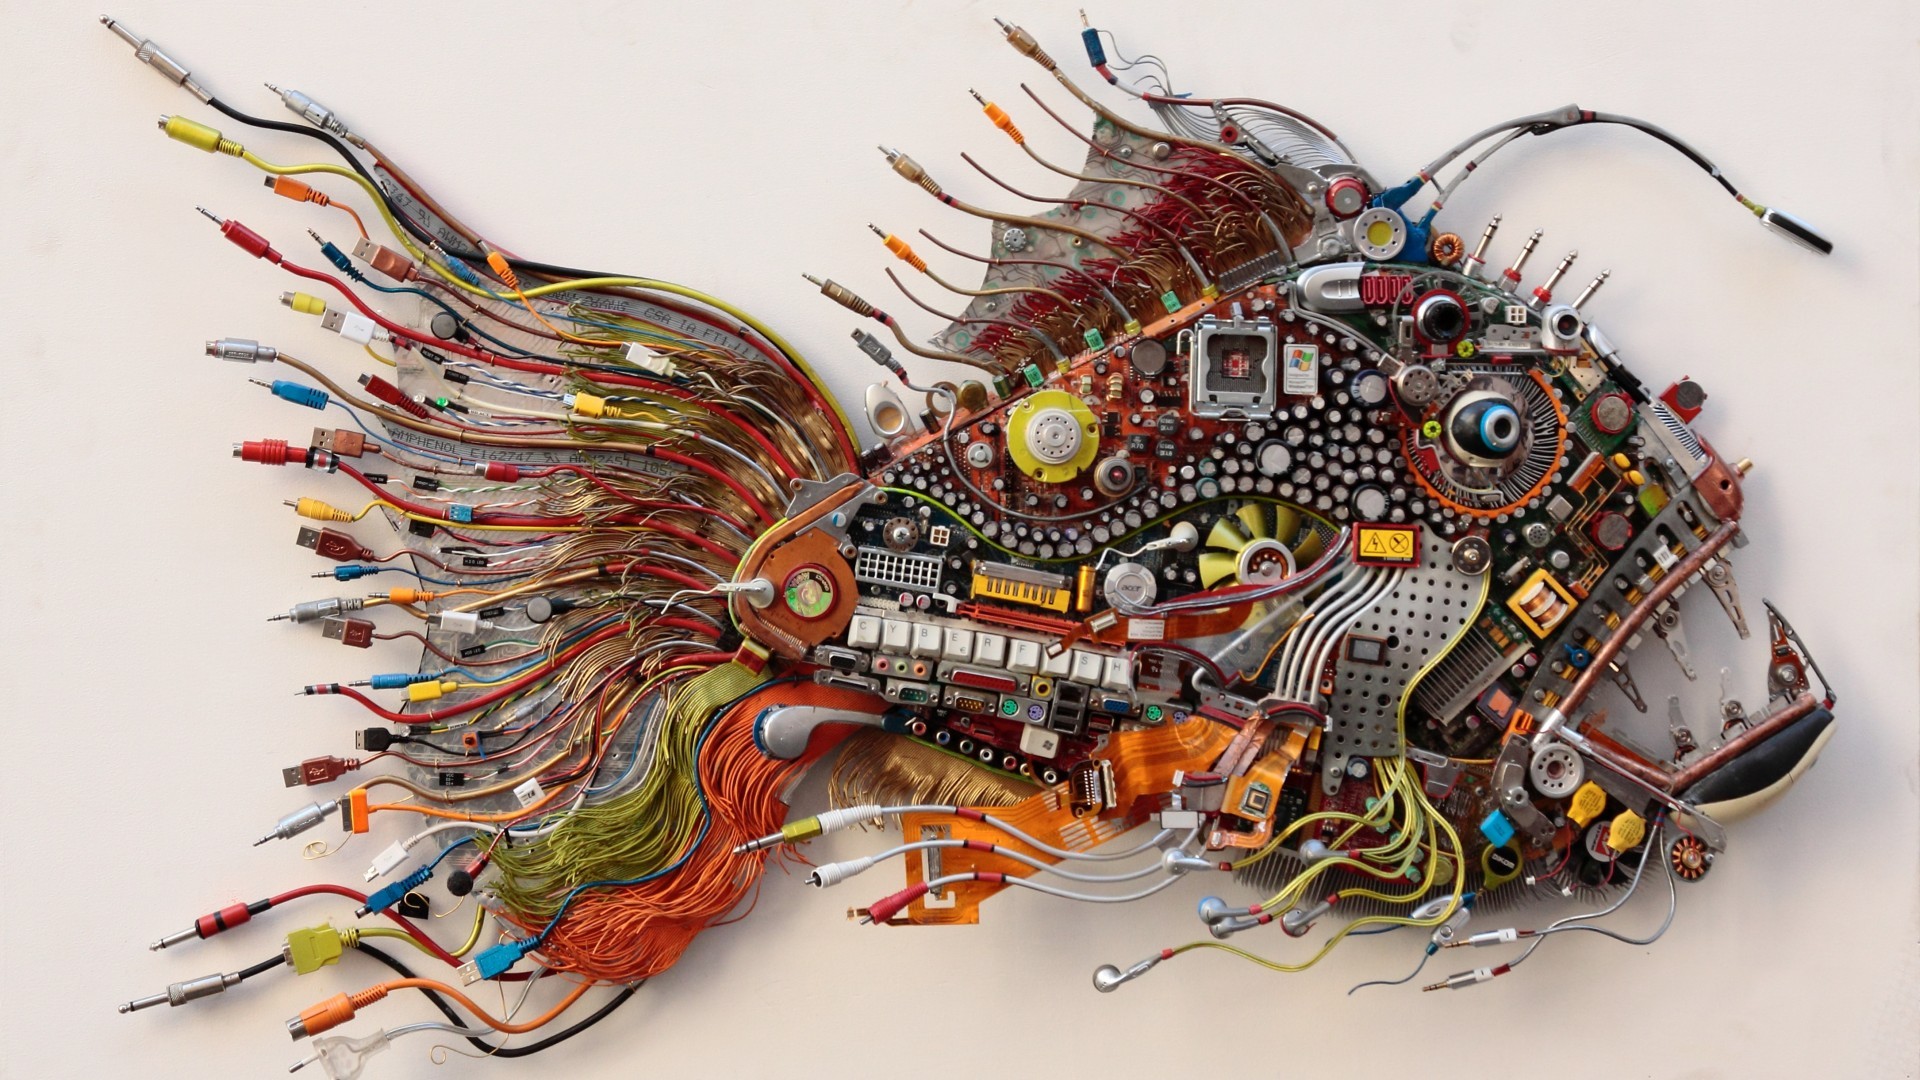 artwork, Wires, Earphones, Motherboards, Electronics, White background, USB, Microchip, Fans, Cyber, Acer, Keyboards, Fin, Fangs, Processor, CPU, Capacitors, Circuits, Hi Tech, Anglerfish, Microsoft Windows Wallpaper